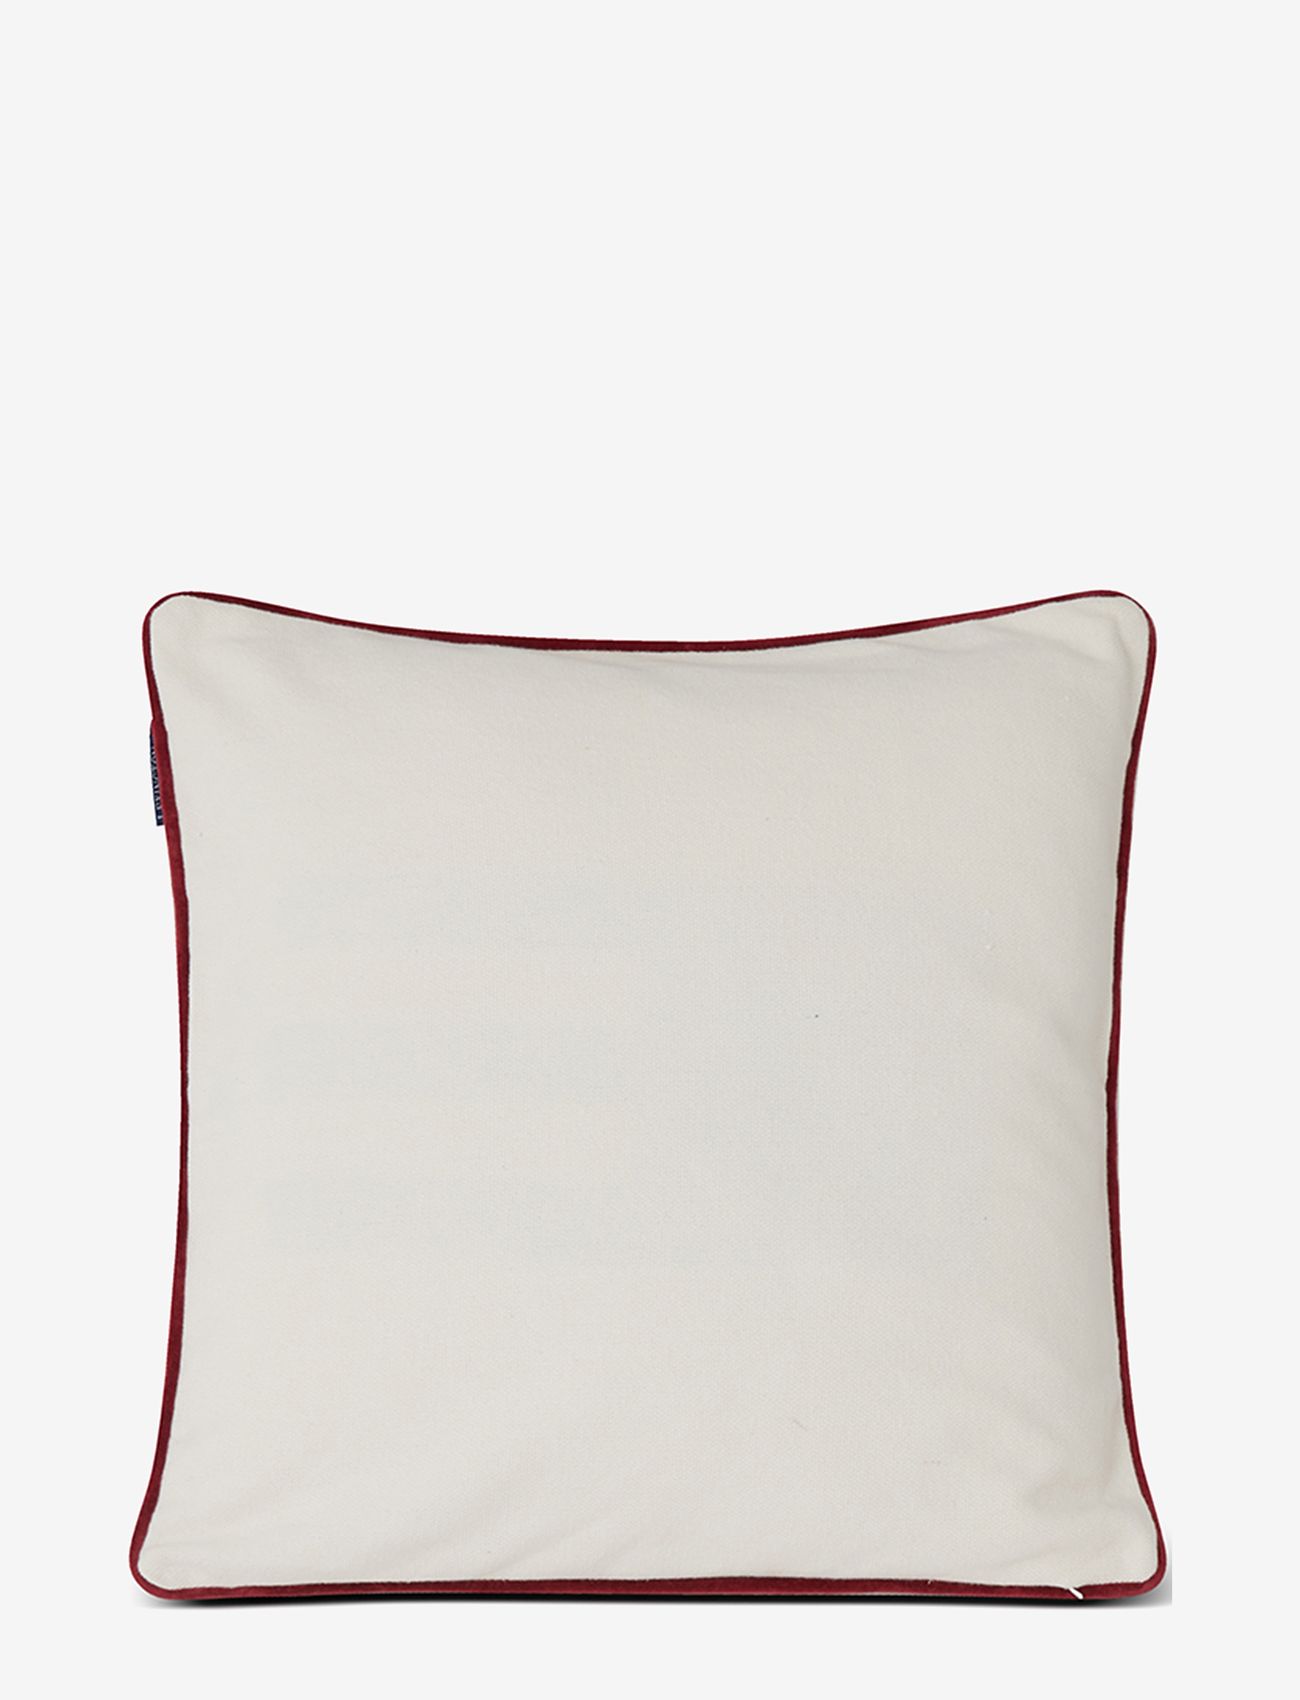 Lexington Home - Seasons Greatings Recycled Cotton Pillow Cover - cushion covers - off white/red - 1